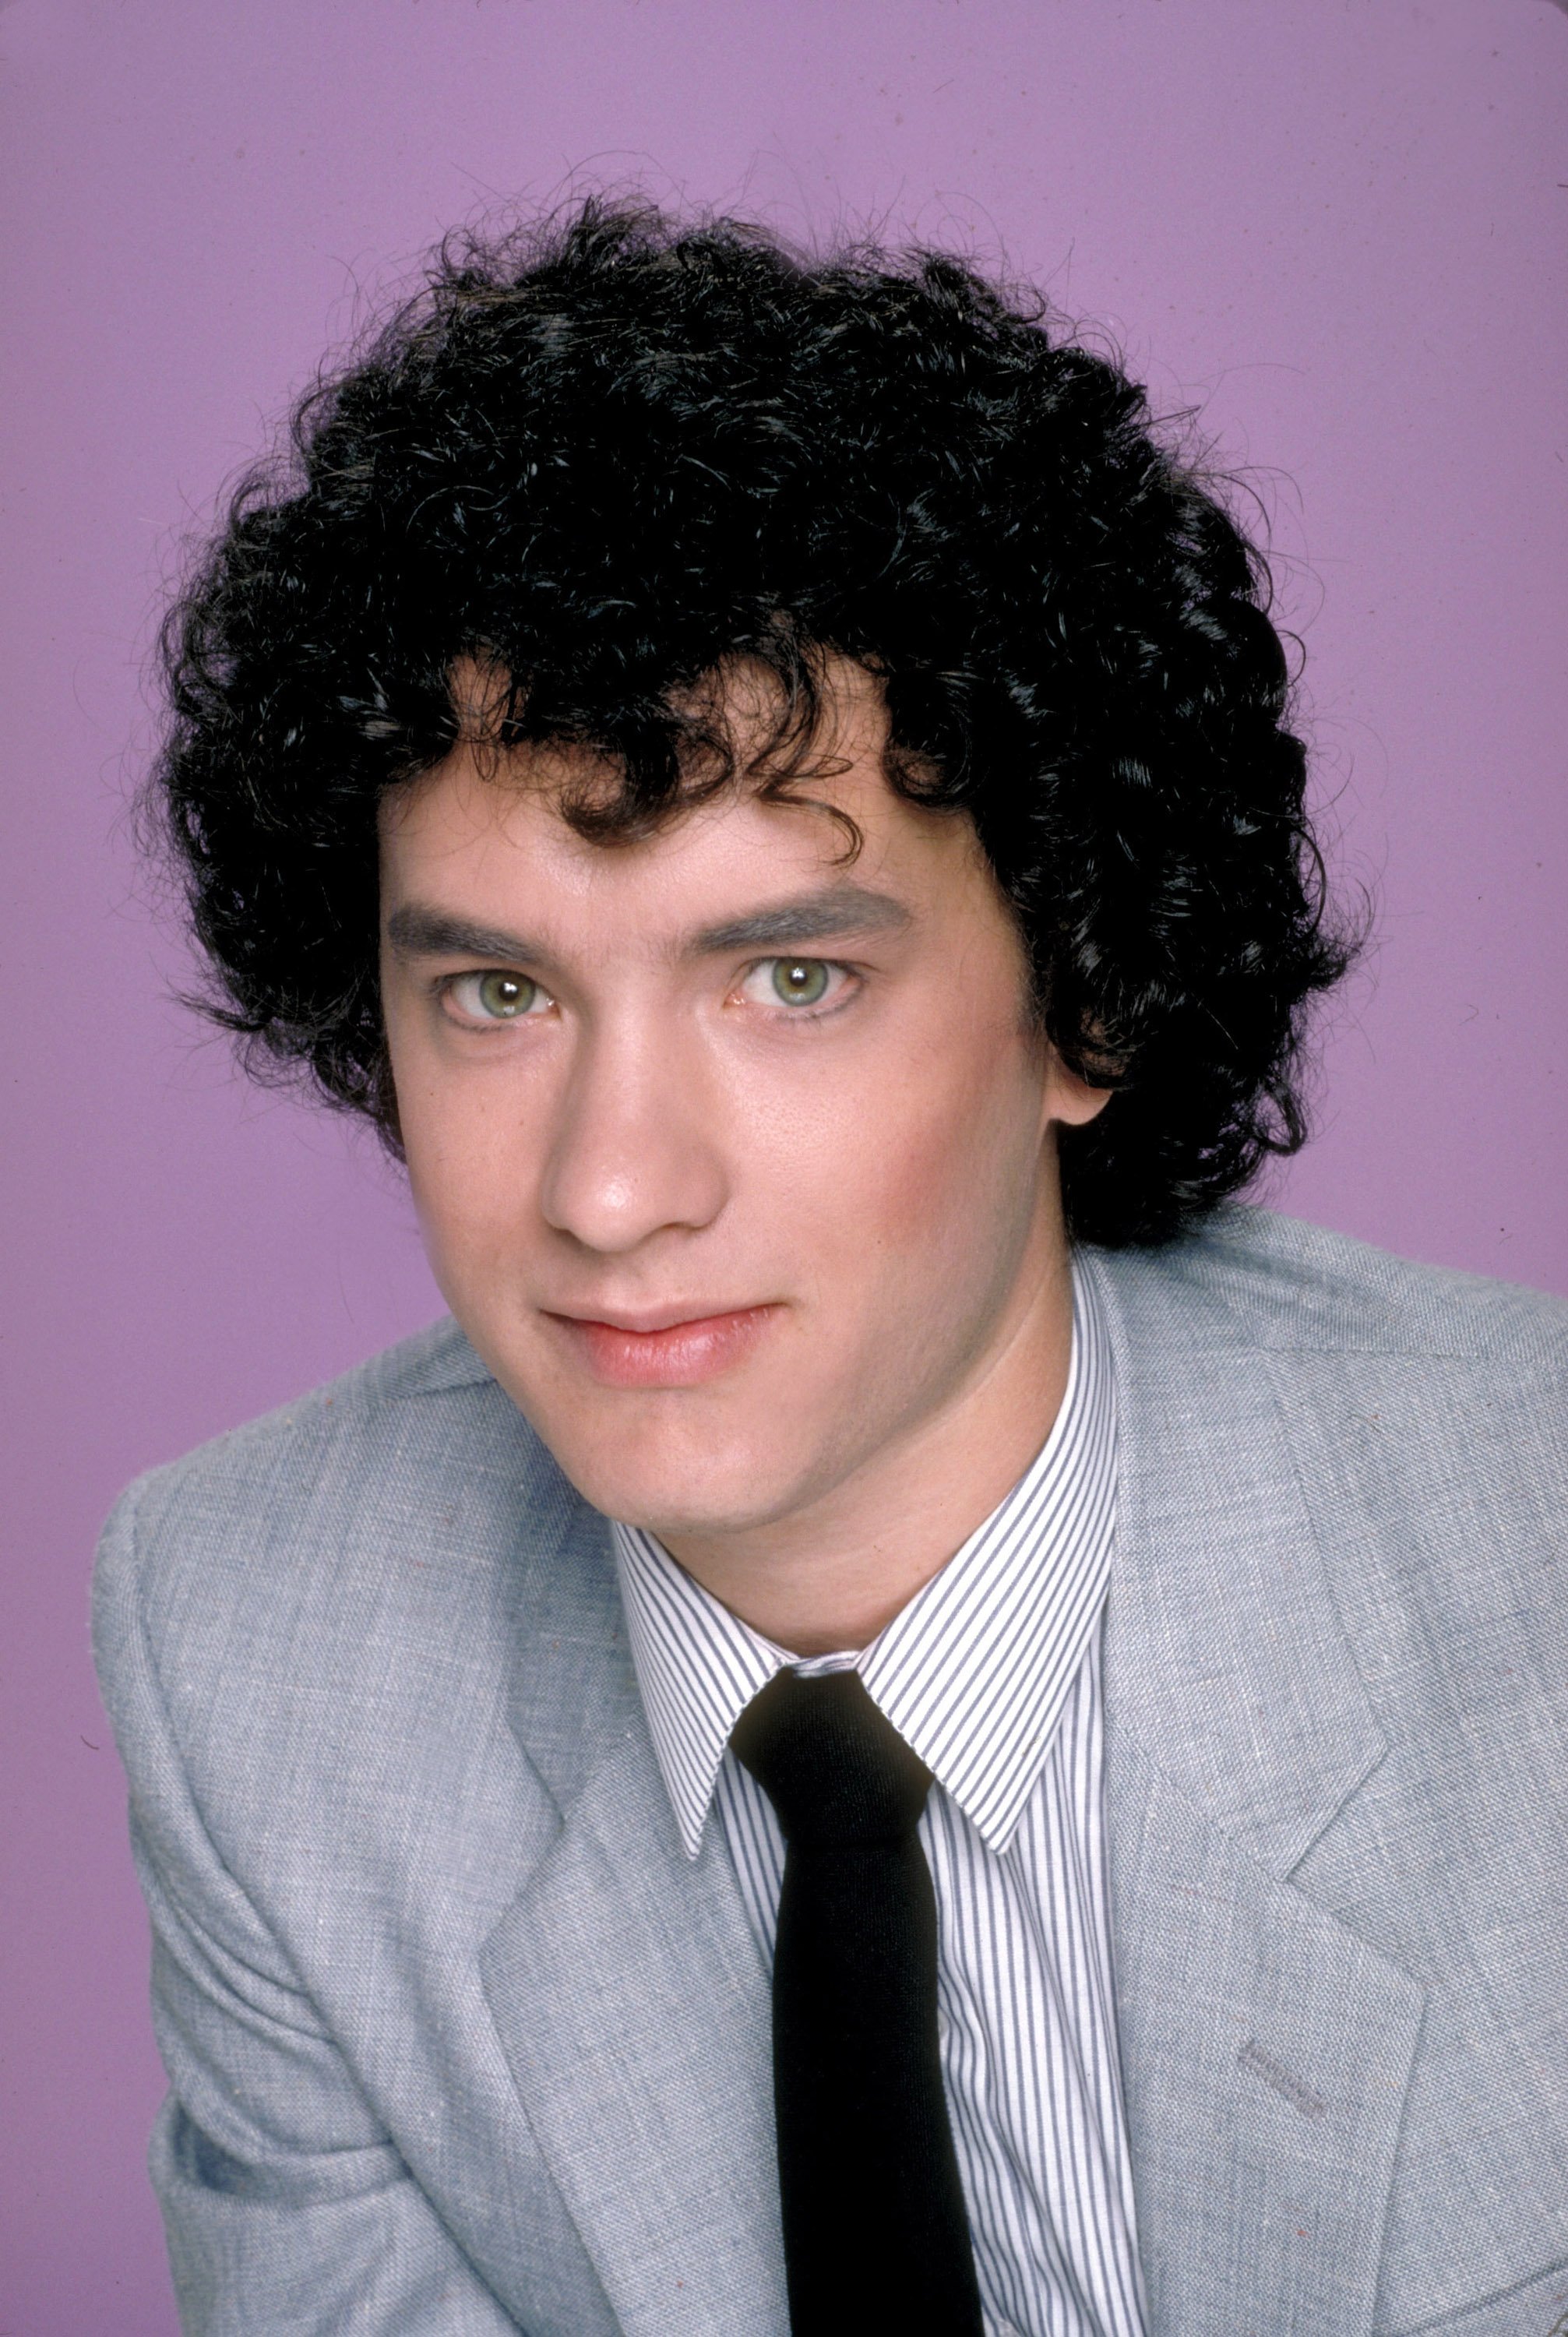 Tom Hanks pictured inside a studio for the 1980 sitcom "Bosom Buddies." | Source: Getty Images 